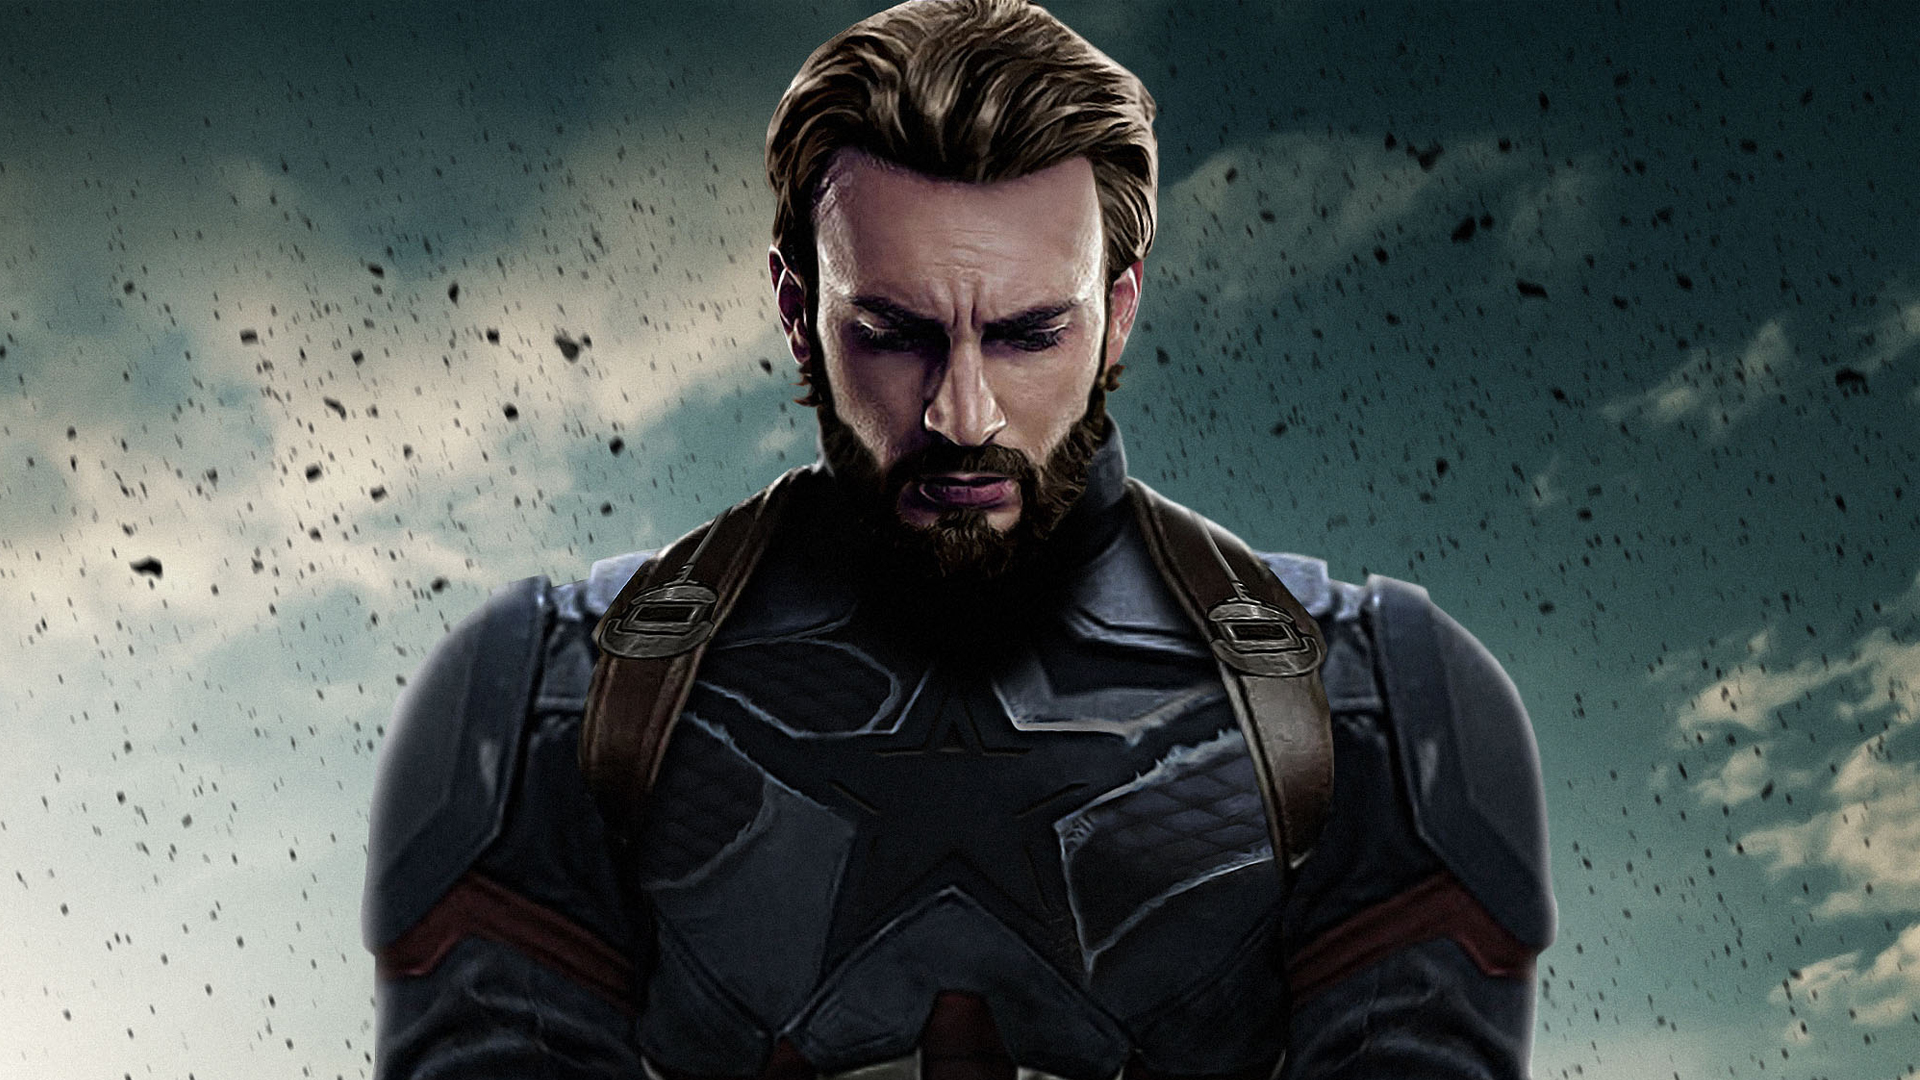 Captain America Hero HD Wallpaper for Android